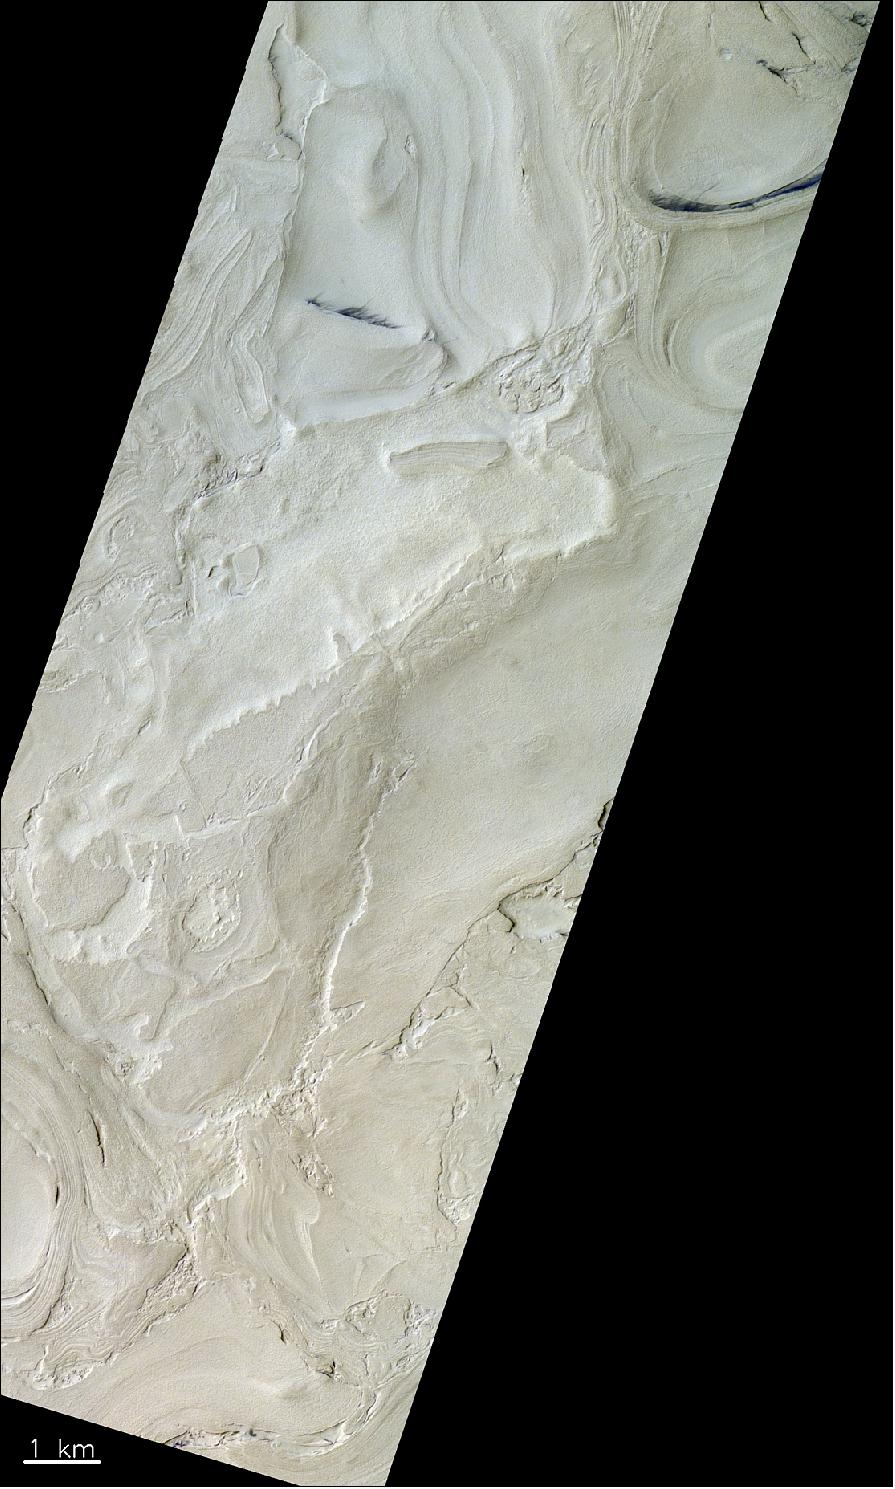 Figure 74: This image captures a landform on Mars peculiar to the Hellas Basin, sometimes referred to as ‘banded terrain’. The pictured area belongs to the western part of the basin, which contains the lowest lying surfaces on Mars – up to 7 km below the defined zero level. The image was taken by the CaSSIS instrument onboard the ESA-Roscosmos ExoMars TGO on 12 December 2018. It is centered at 39.04ºS/53.9ºE (image credit: ESA/Roscosmos/CaSSIS, CC BY-SA 3.0 IGO)